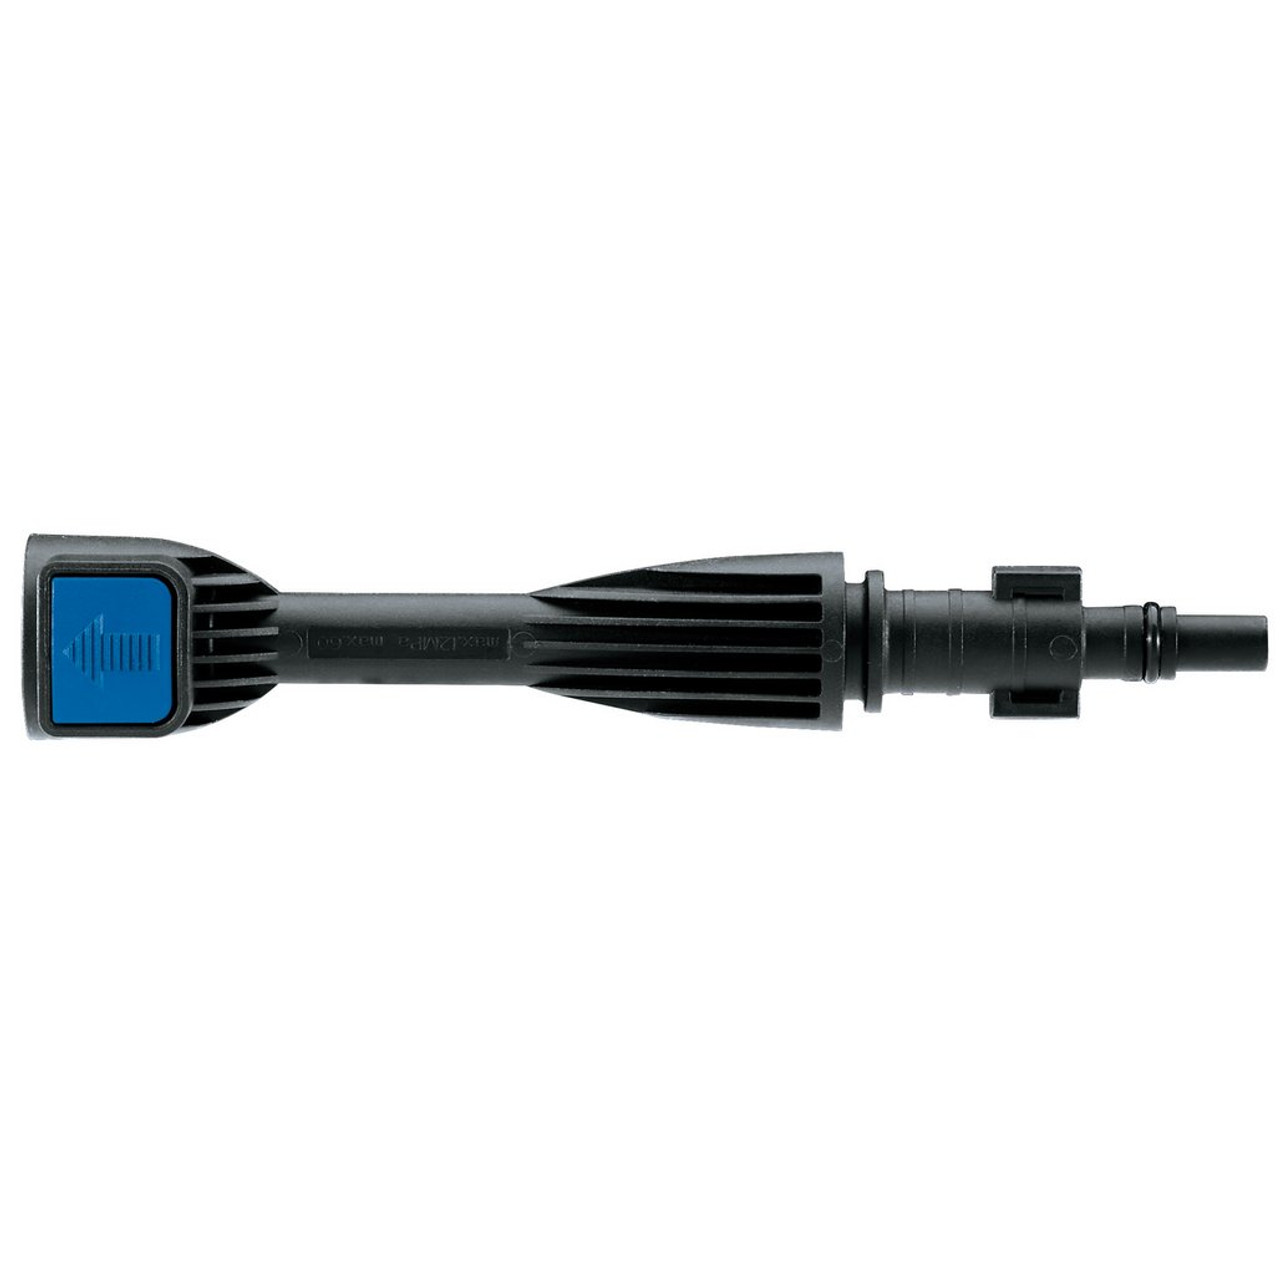 Draper D20 Pressure Washer Kit Supplied with watering lance and extension lance.